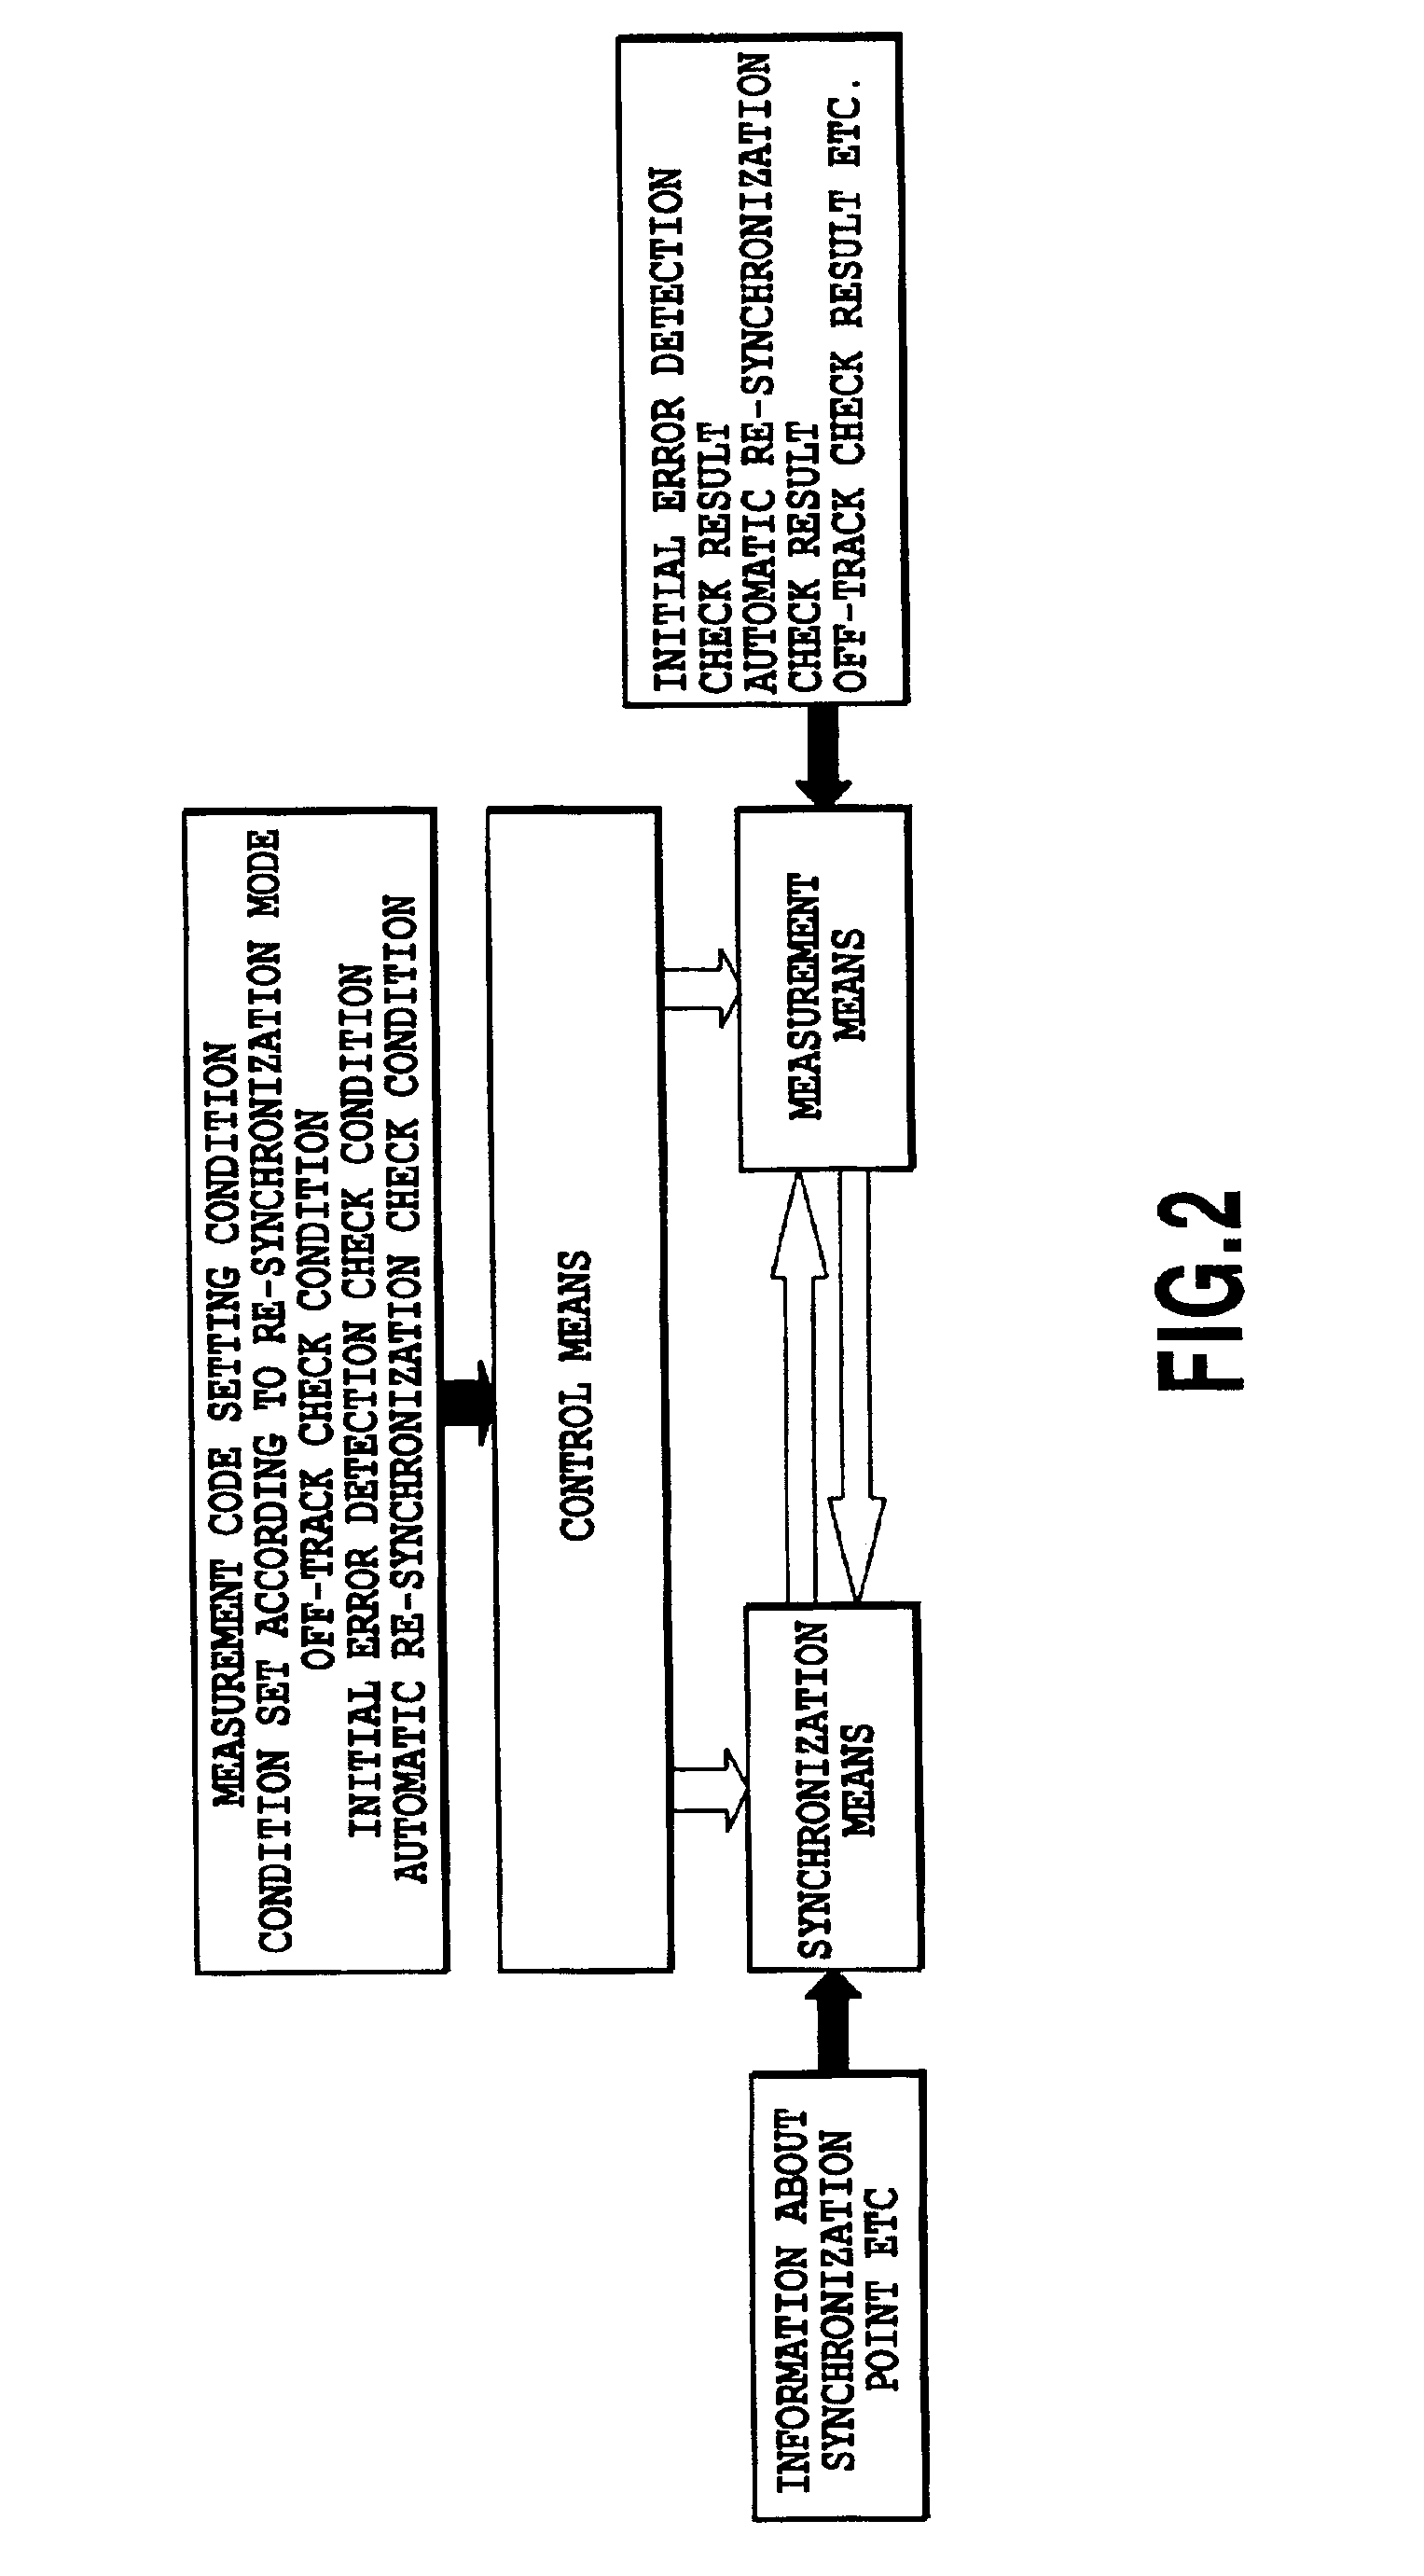 Apparatus and method for acquisition of communication quality